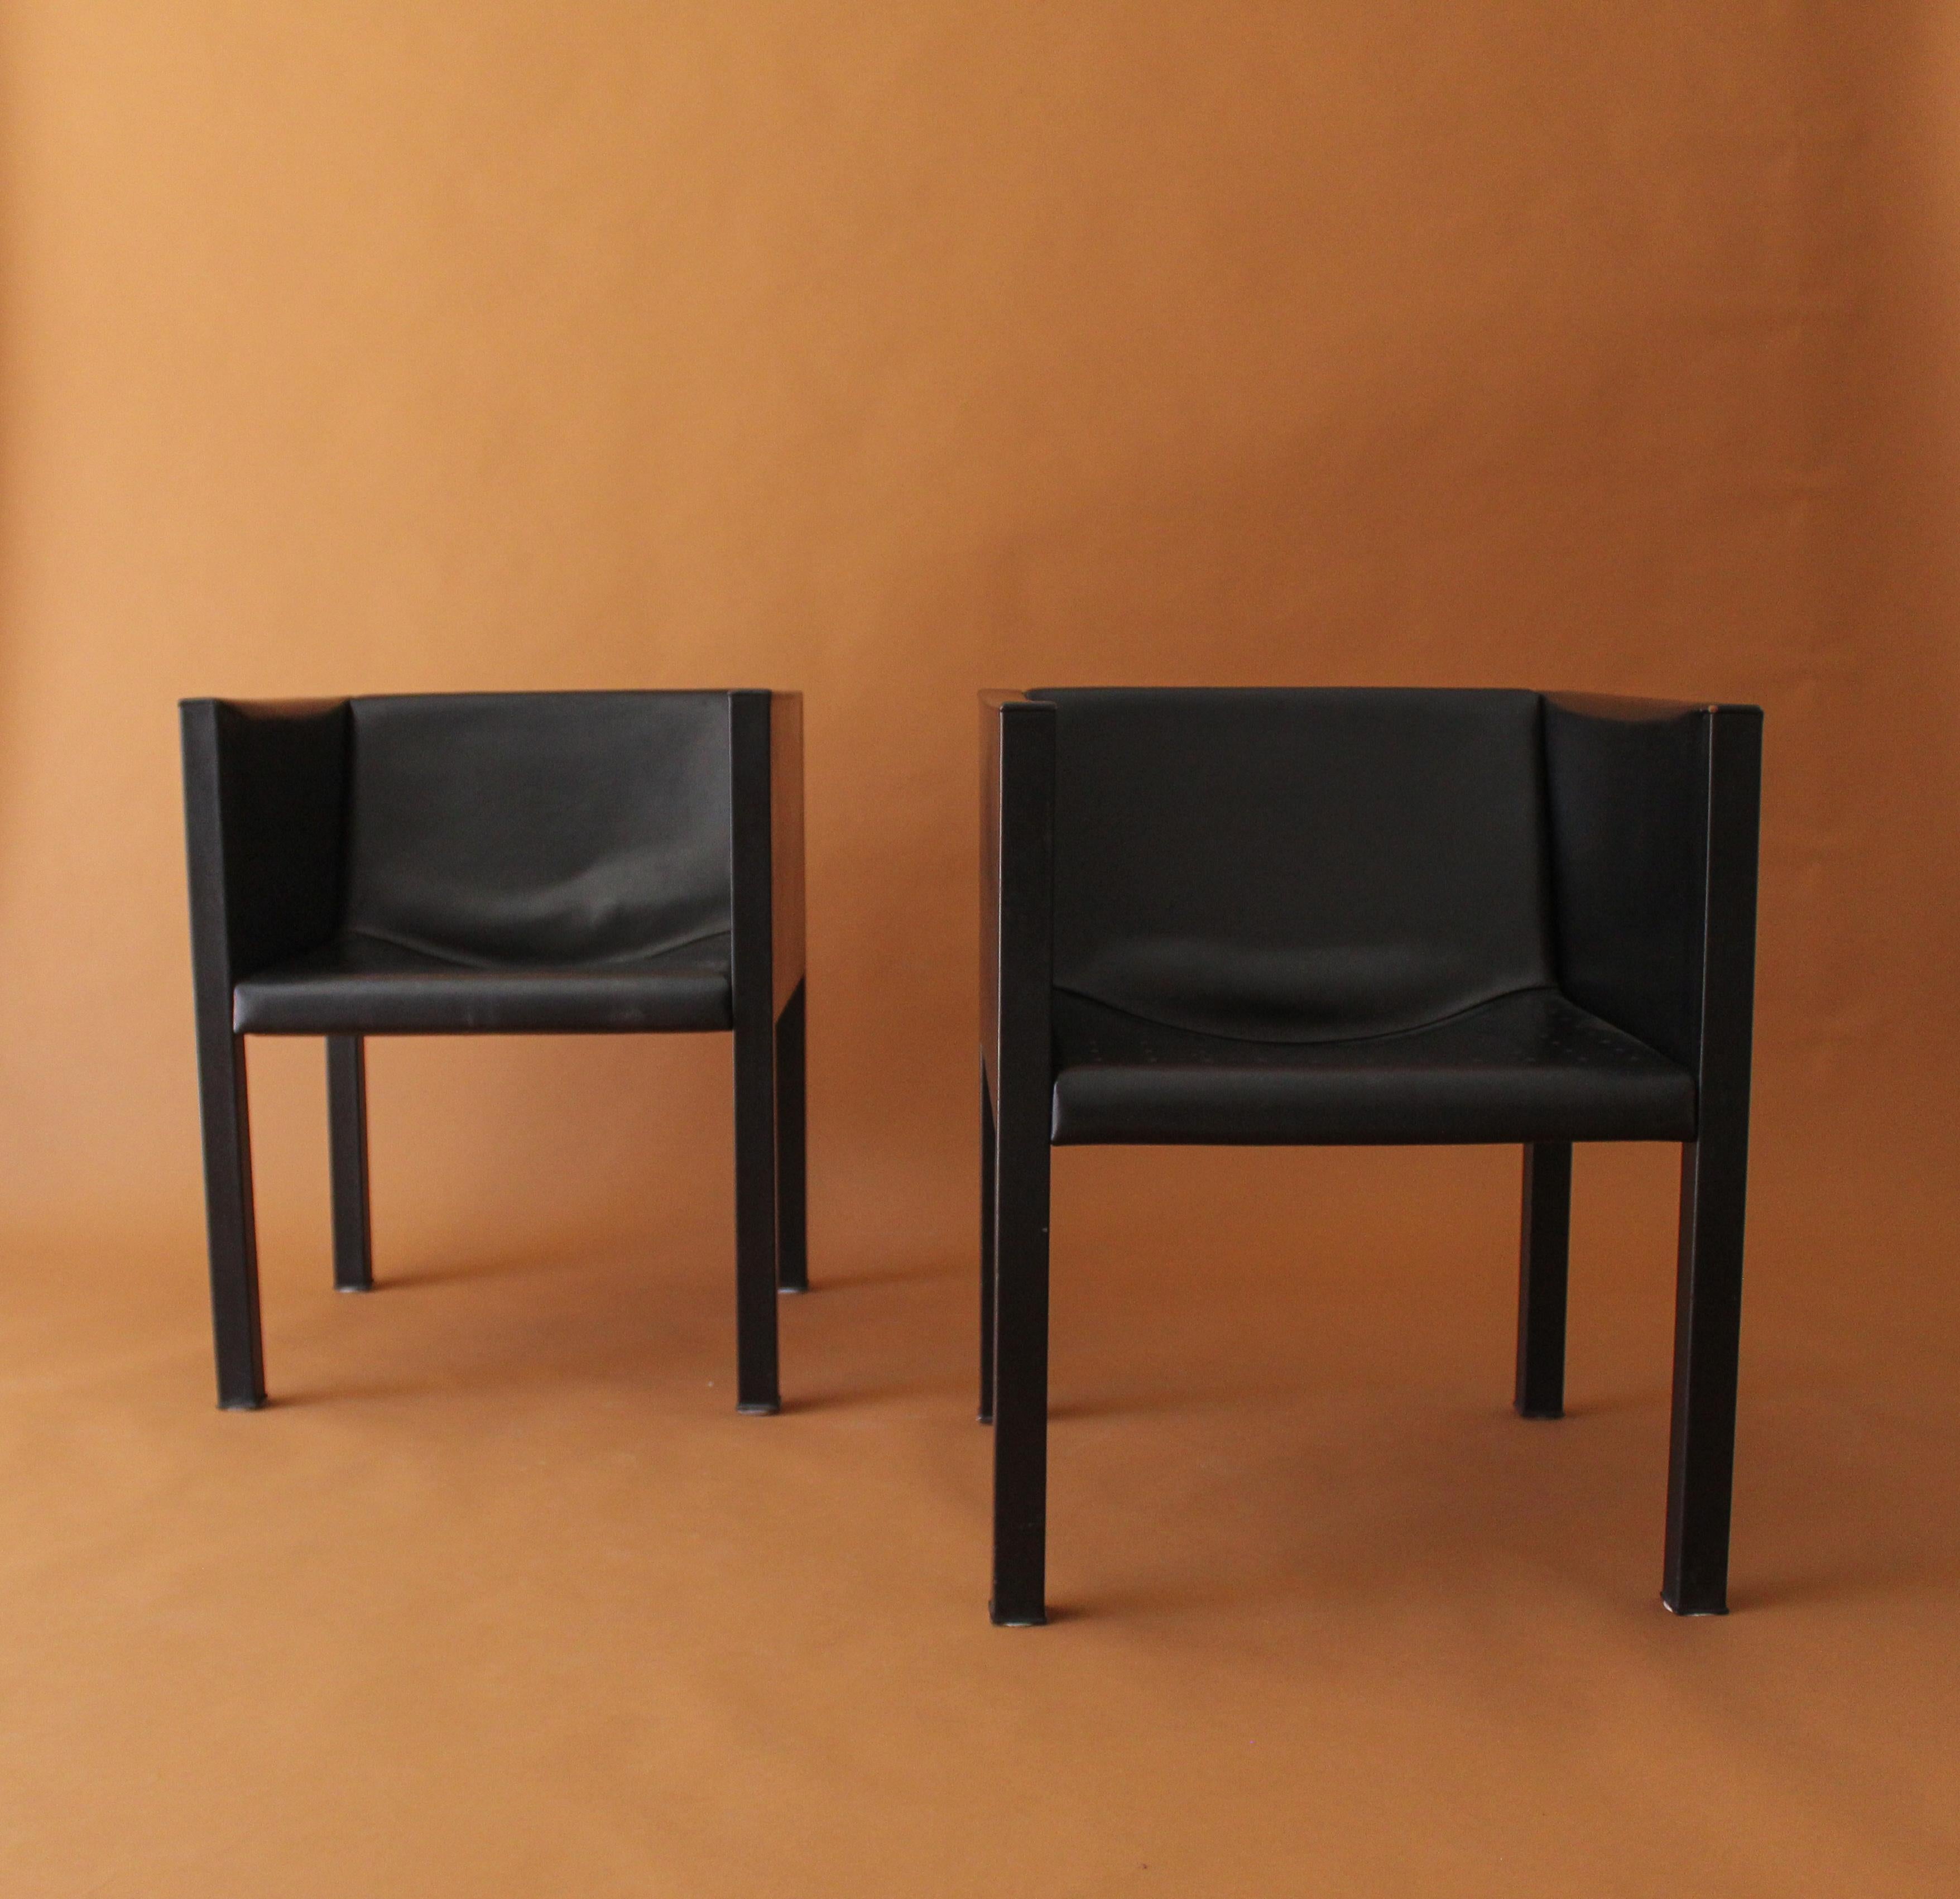 Pair of unusual B&B Italia chairs fully covered in thick black leather, we have contacted several B&B Italia showrooms and they have been unable to identify the maker. We have found some attribution in Auction catalogs to Mario Bellini but unable to